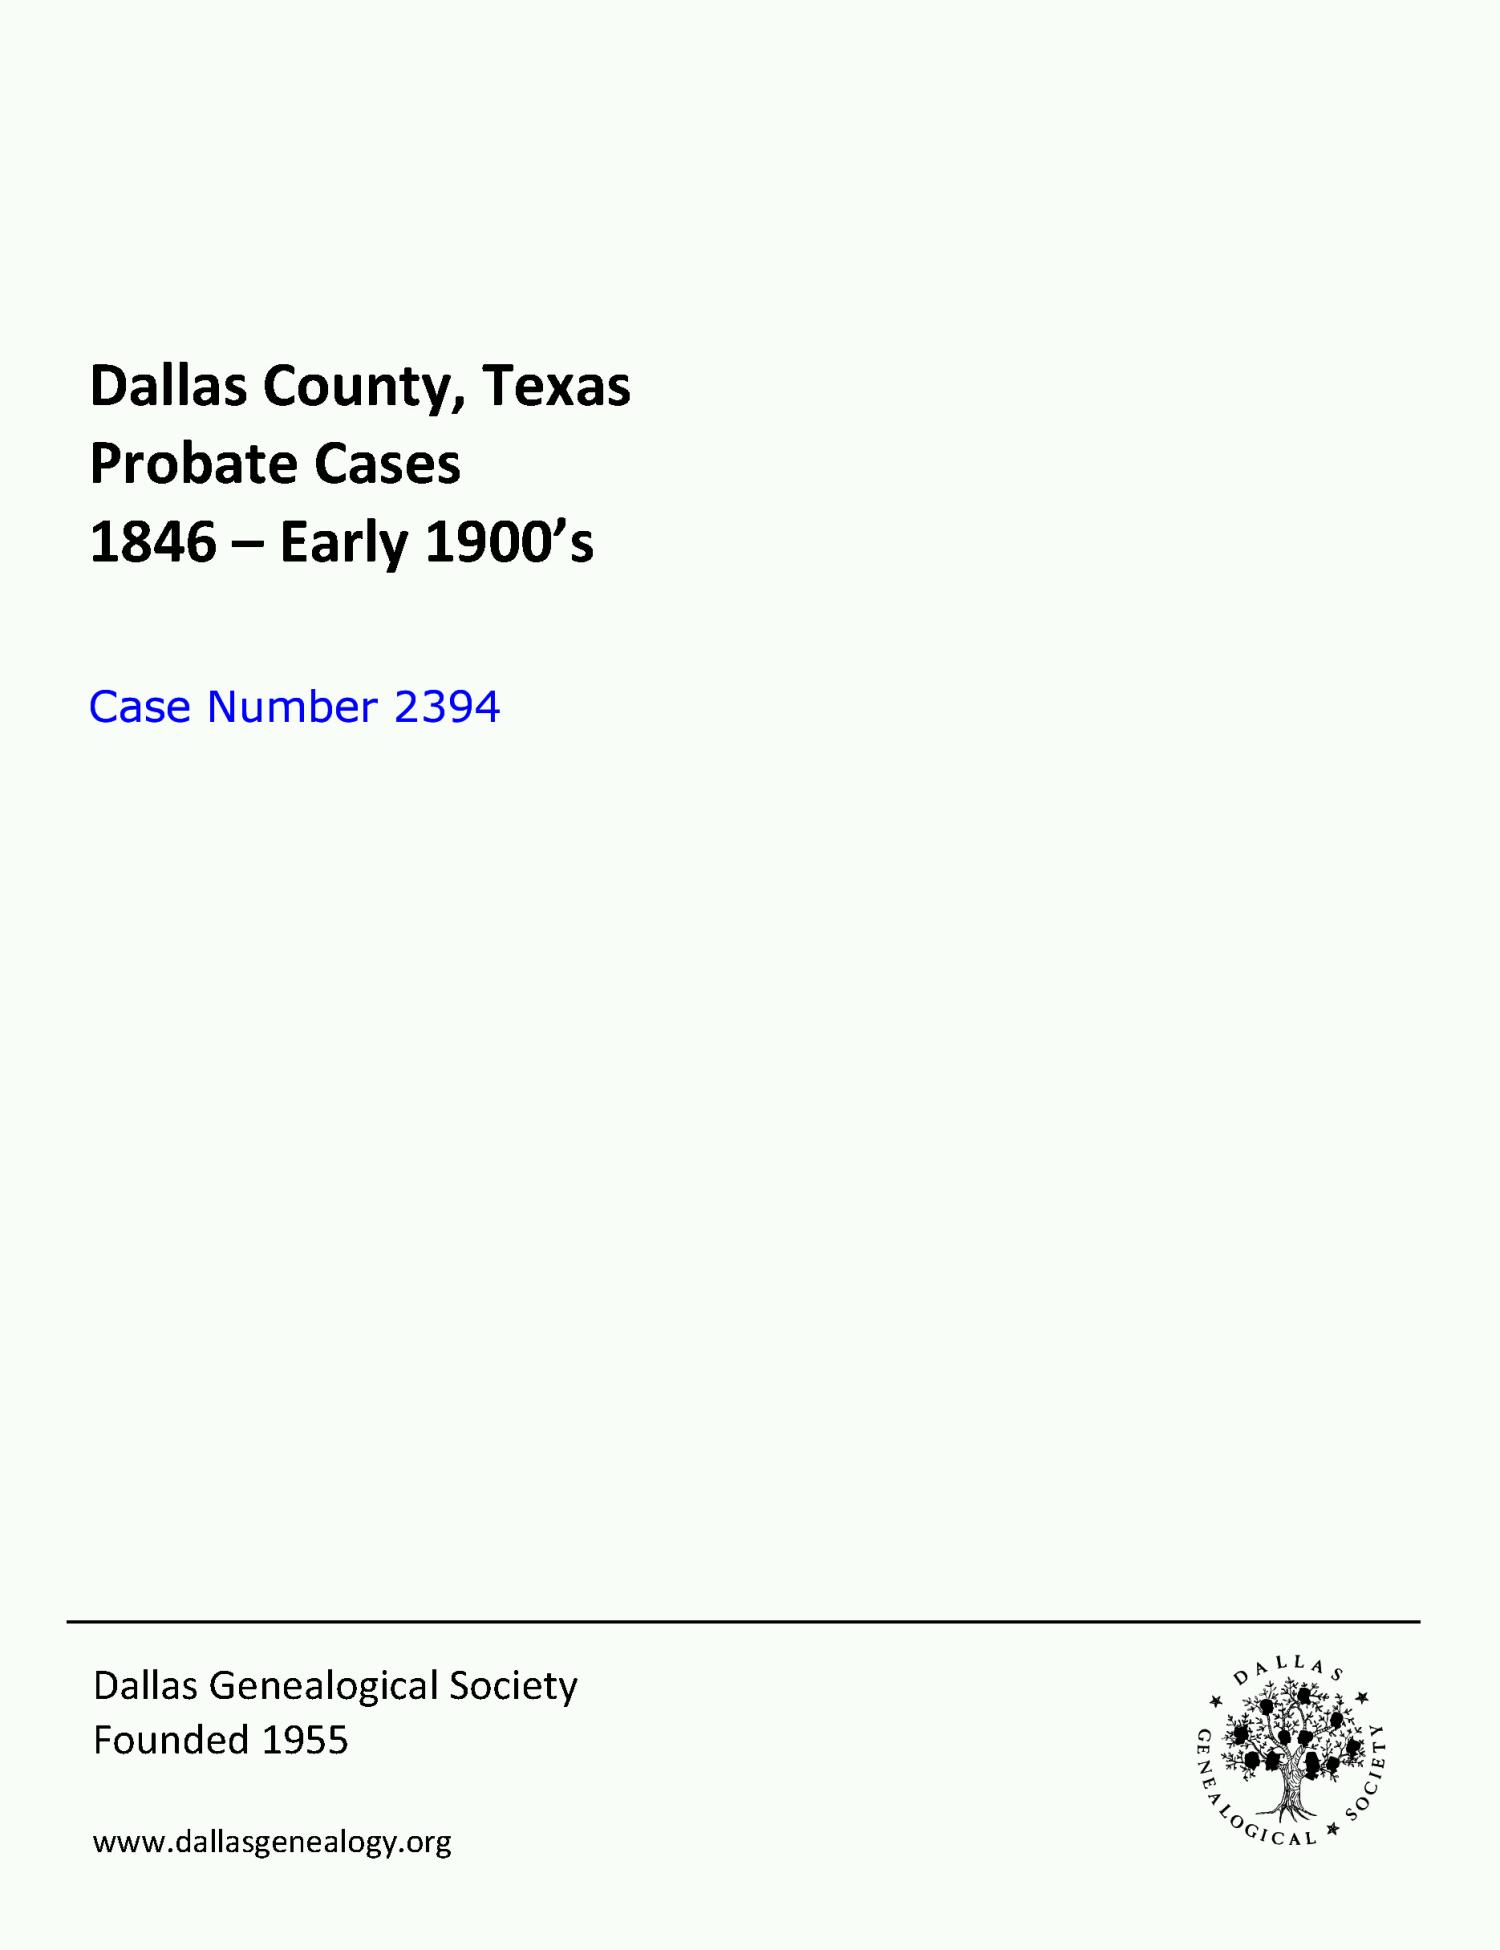 Dallas County Probate Case 2394: Williams, Clarence J. et al (Minors)
                                                
                                                    [Sequence #]: 1 of 68
                                                